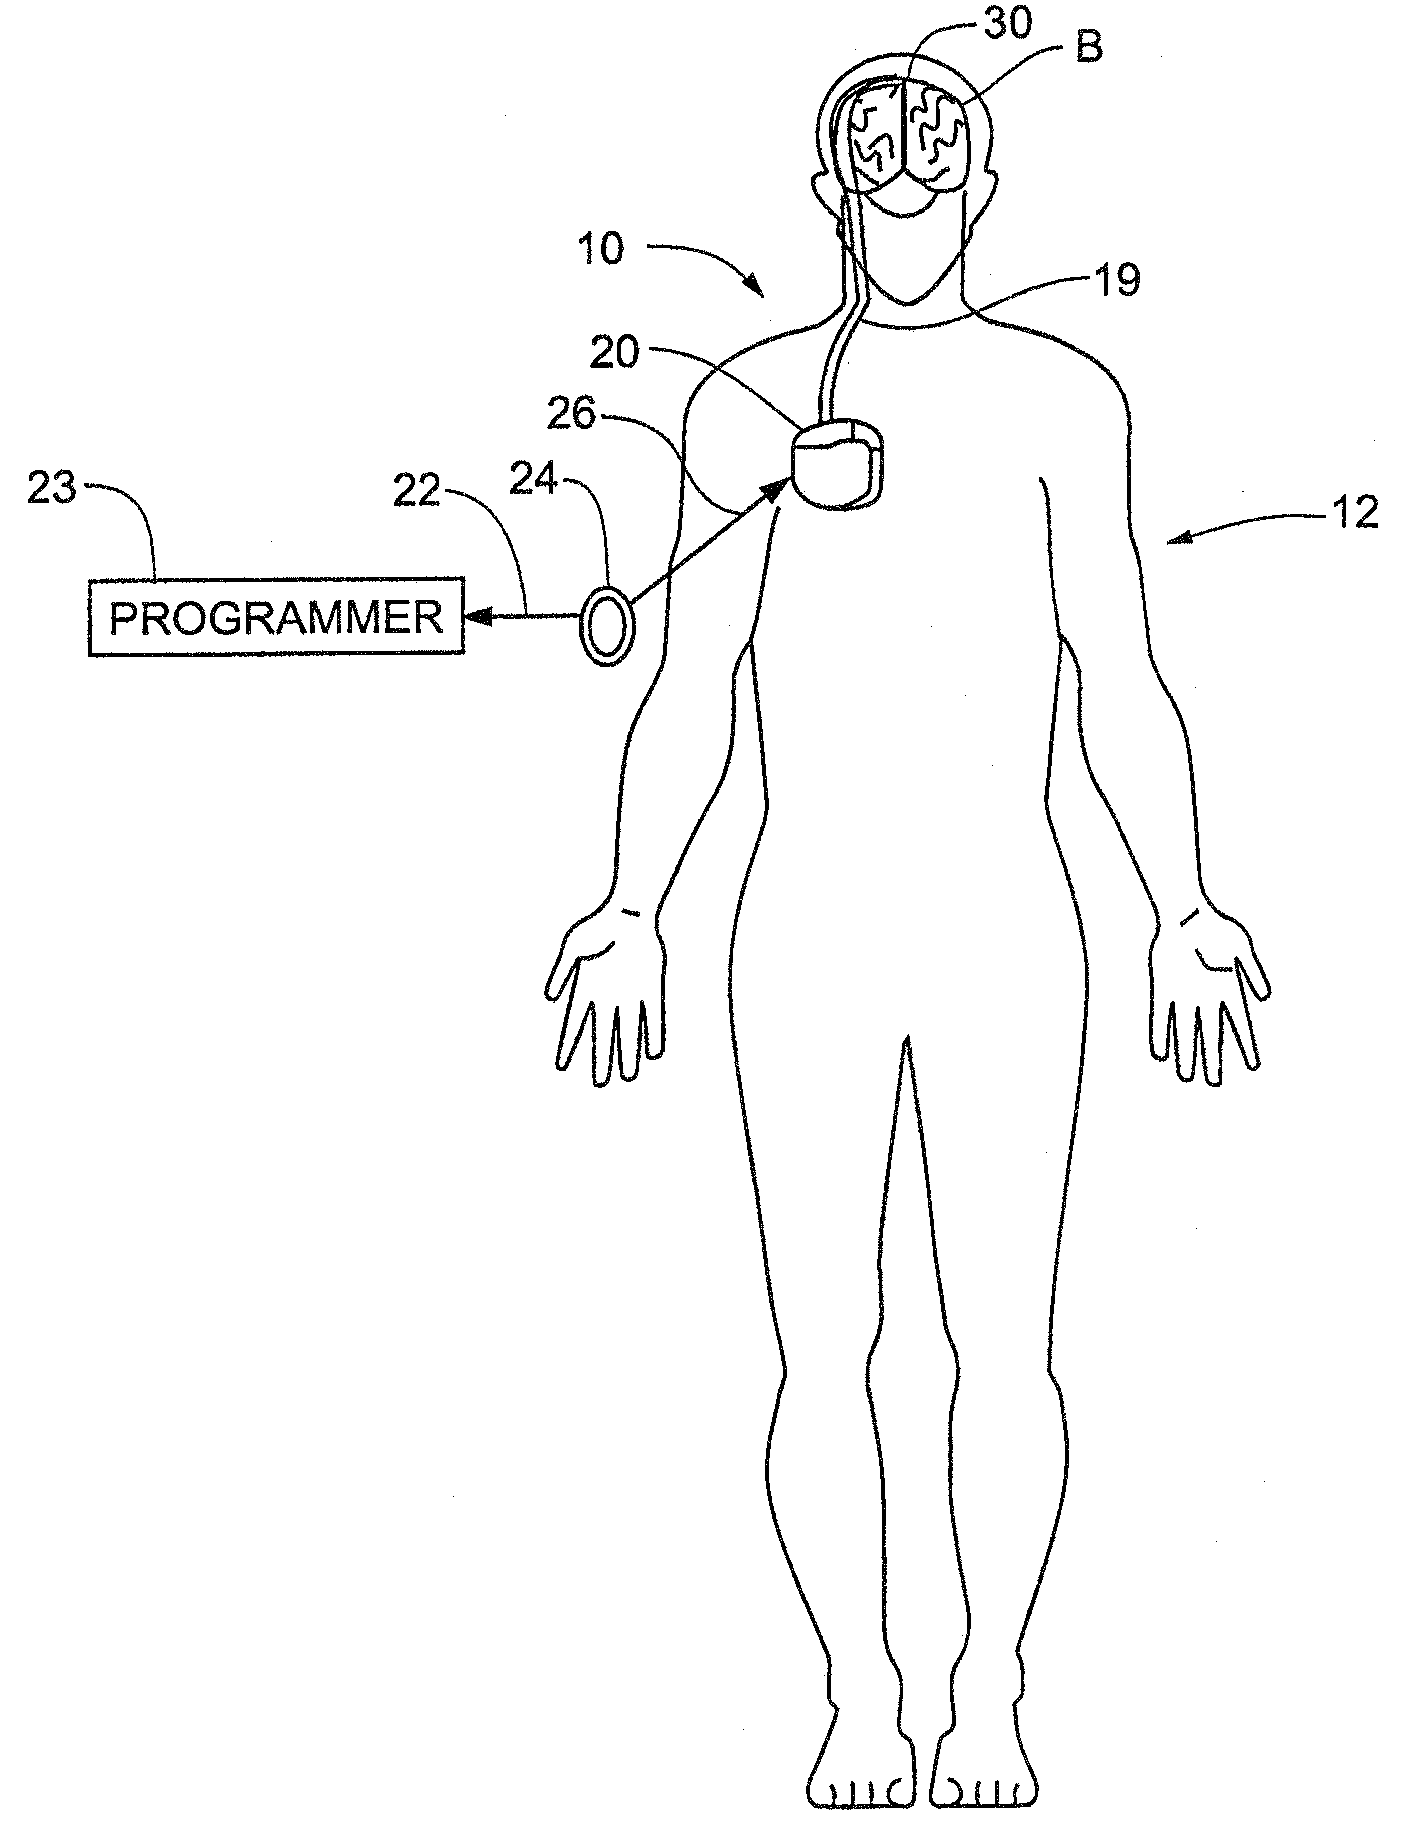 Method and Apparatus for the Treatment of Movement Disorders